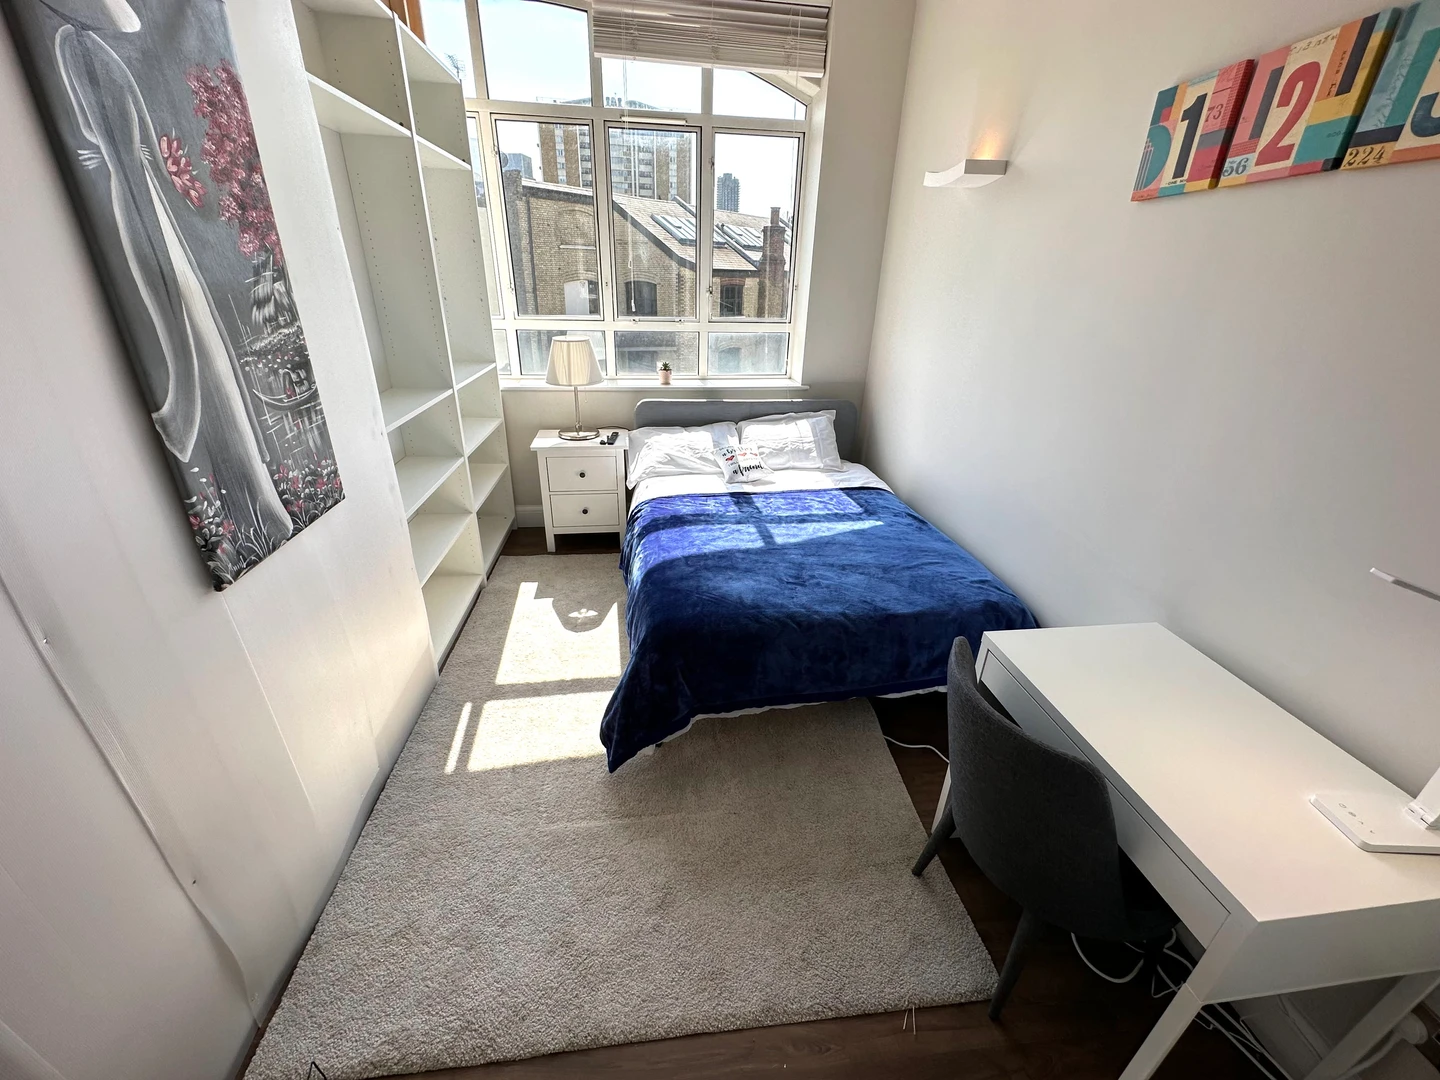 Picture of Private room at 22 Dingley Rd London, UK, EC1V 8BW